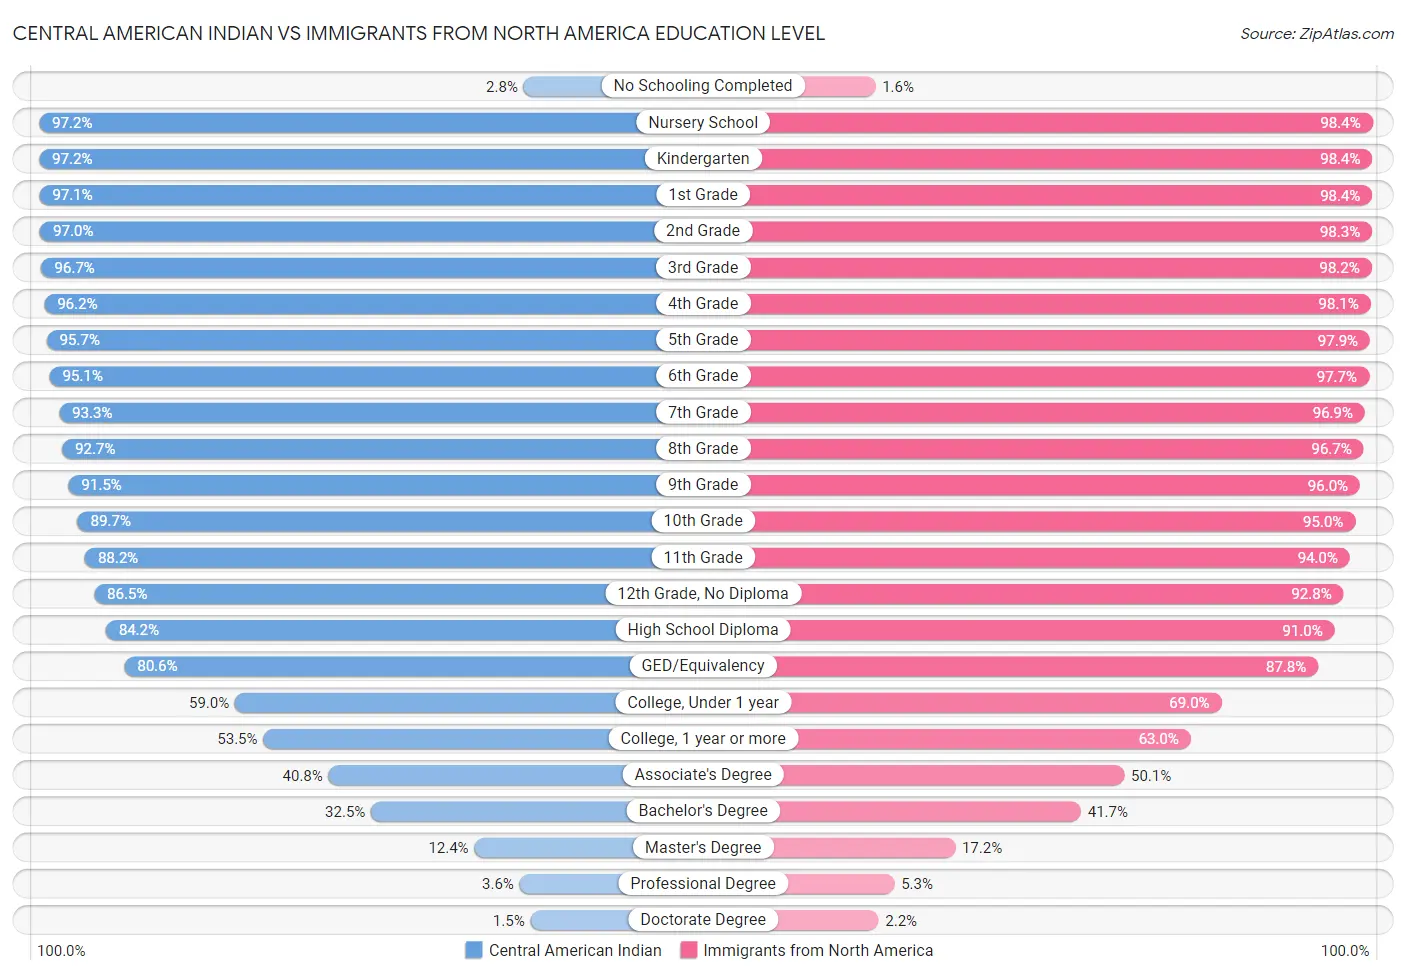 Central American Indian vs Immigrants from North America Education Level